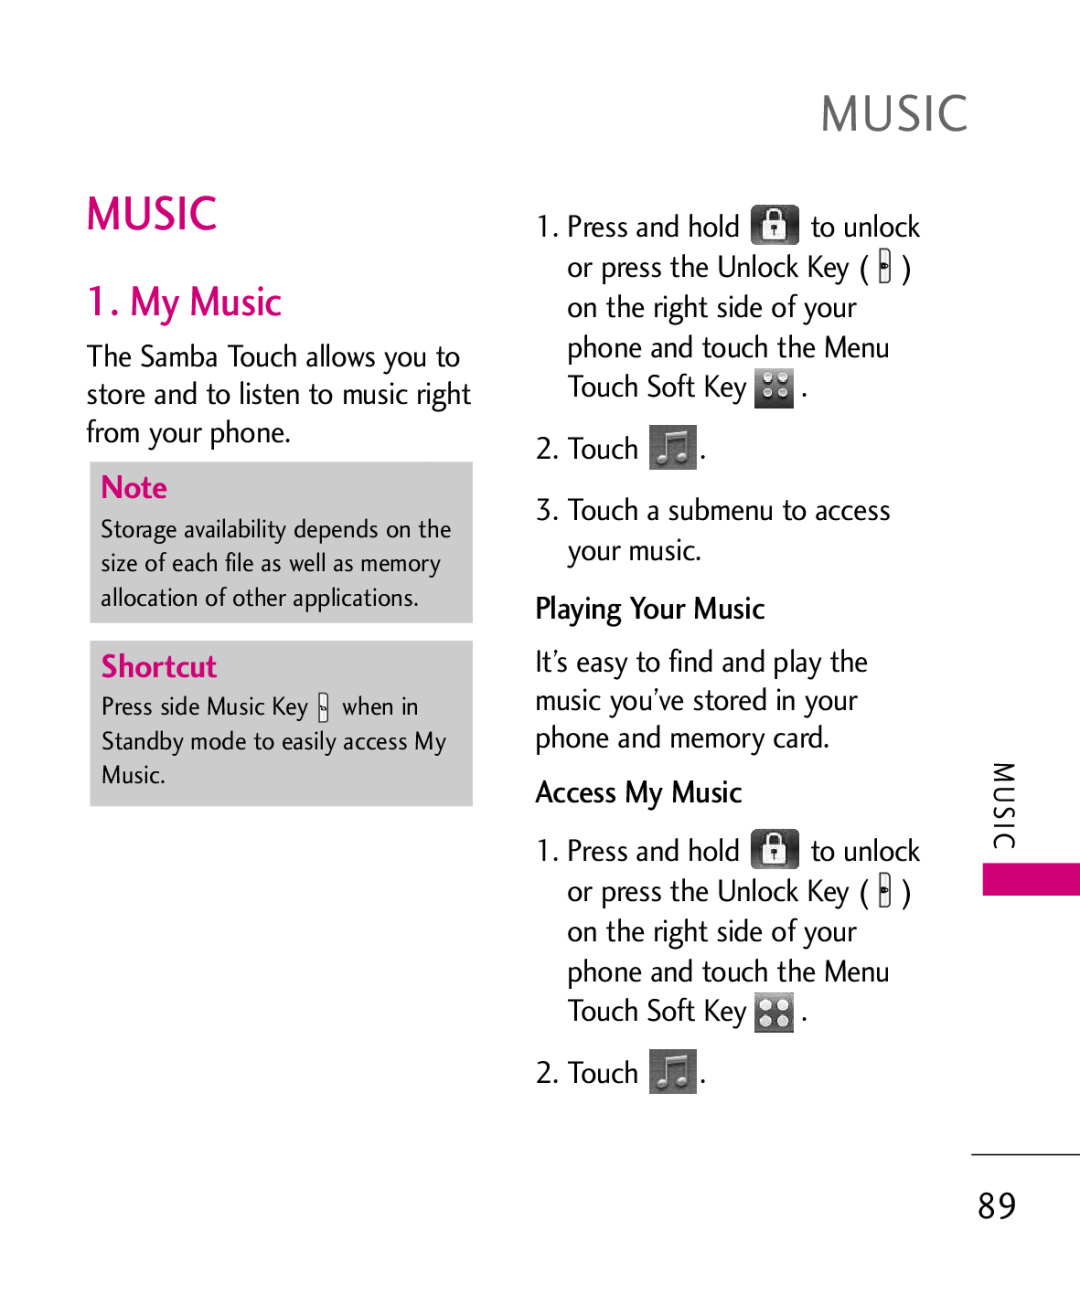 LG Electronics MMBB0379501 manual My Music, Shortcut, Playing Your Music, Touch 3. Touch a submenu to access your music 